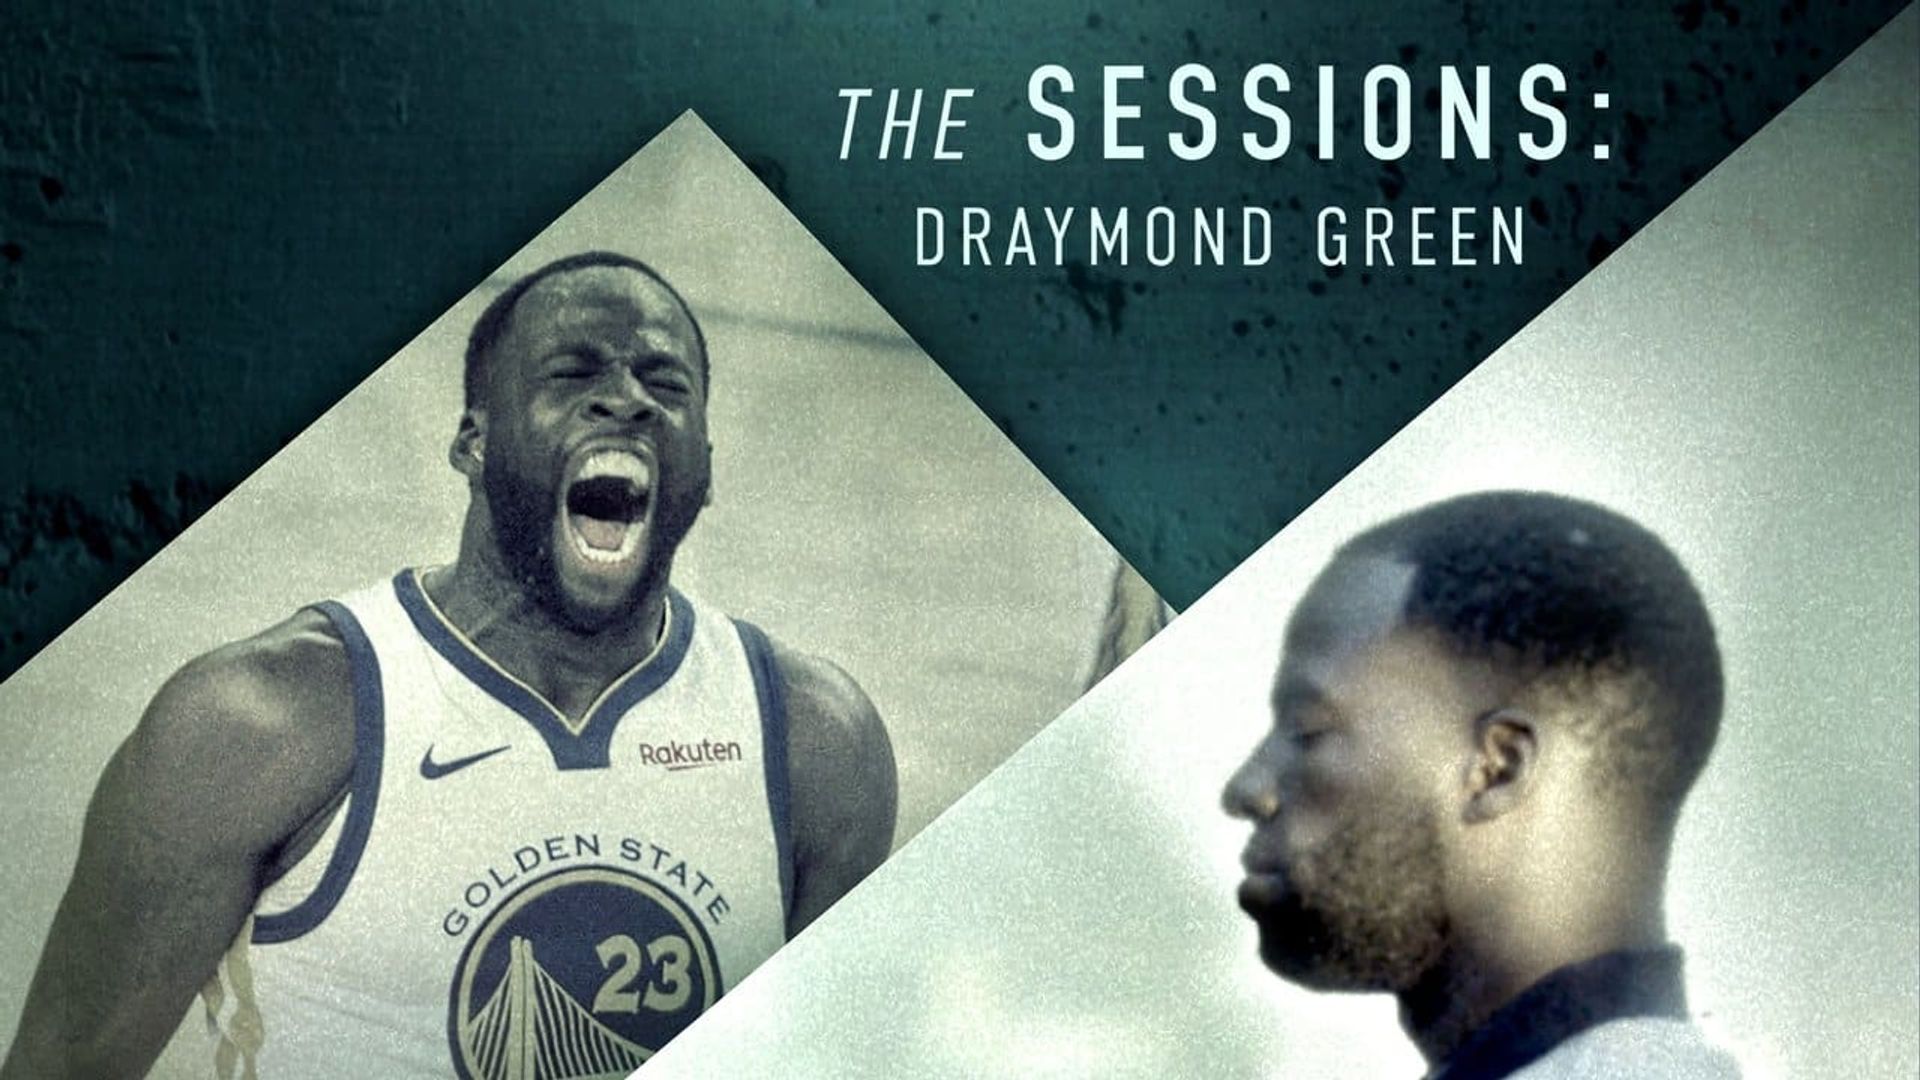 The Sessions: Draymond Green background